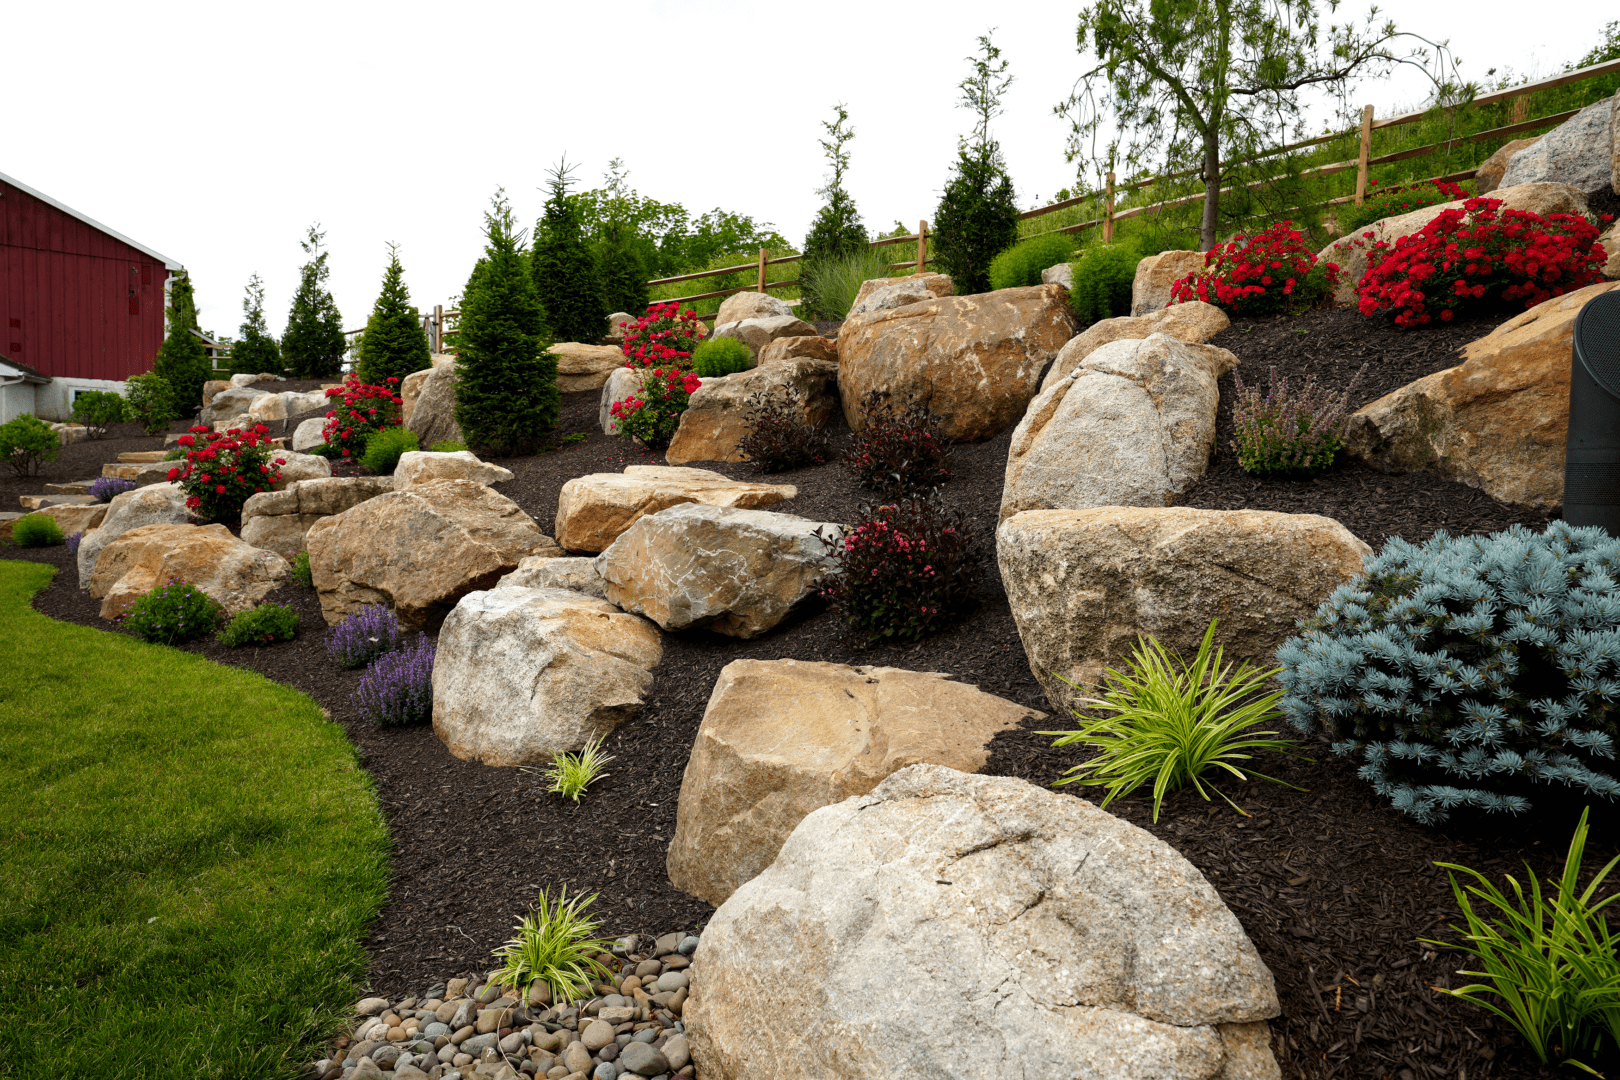 A boulder rock garden with flowers and shrubs.